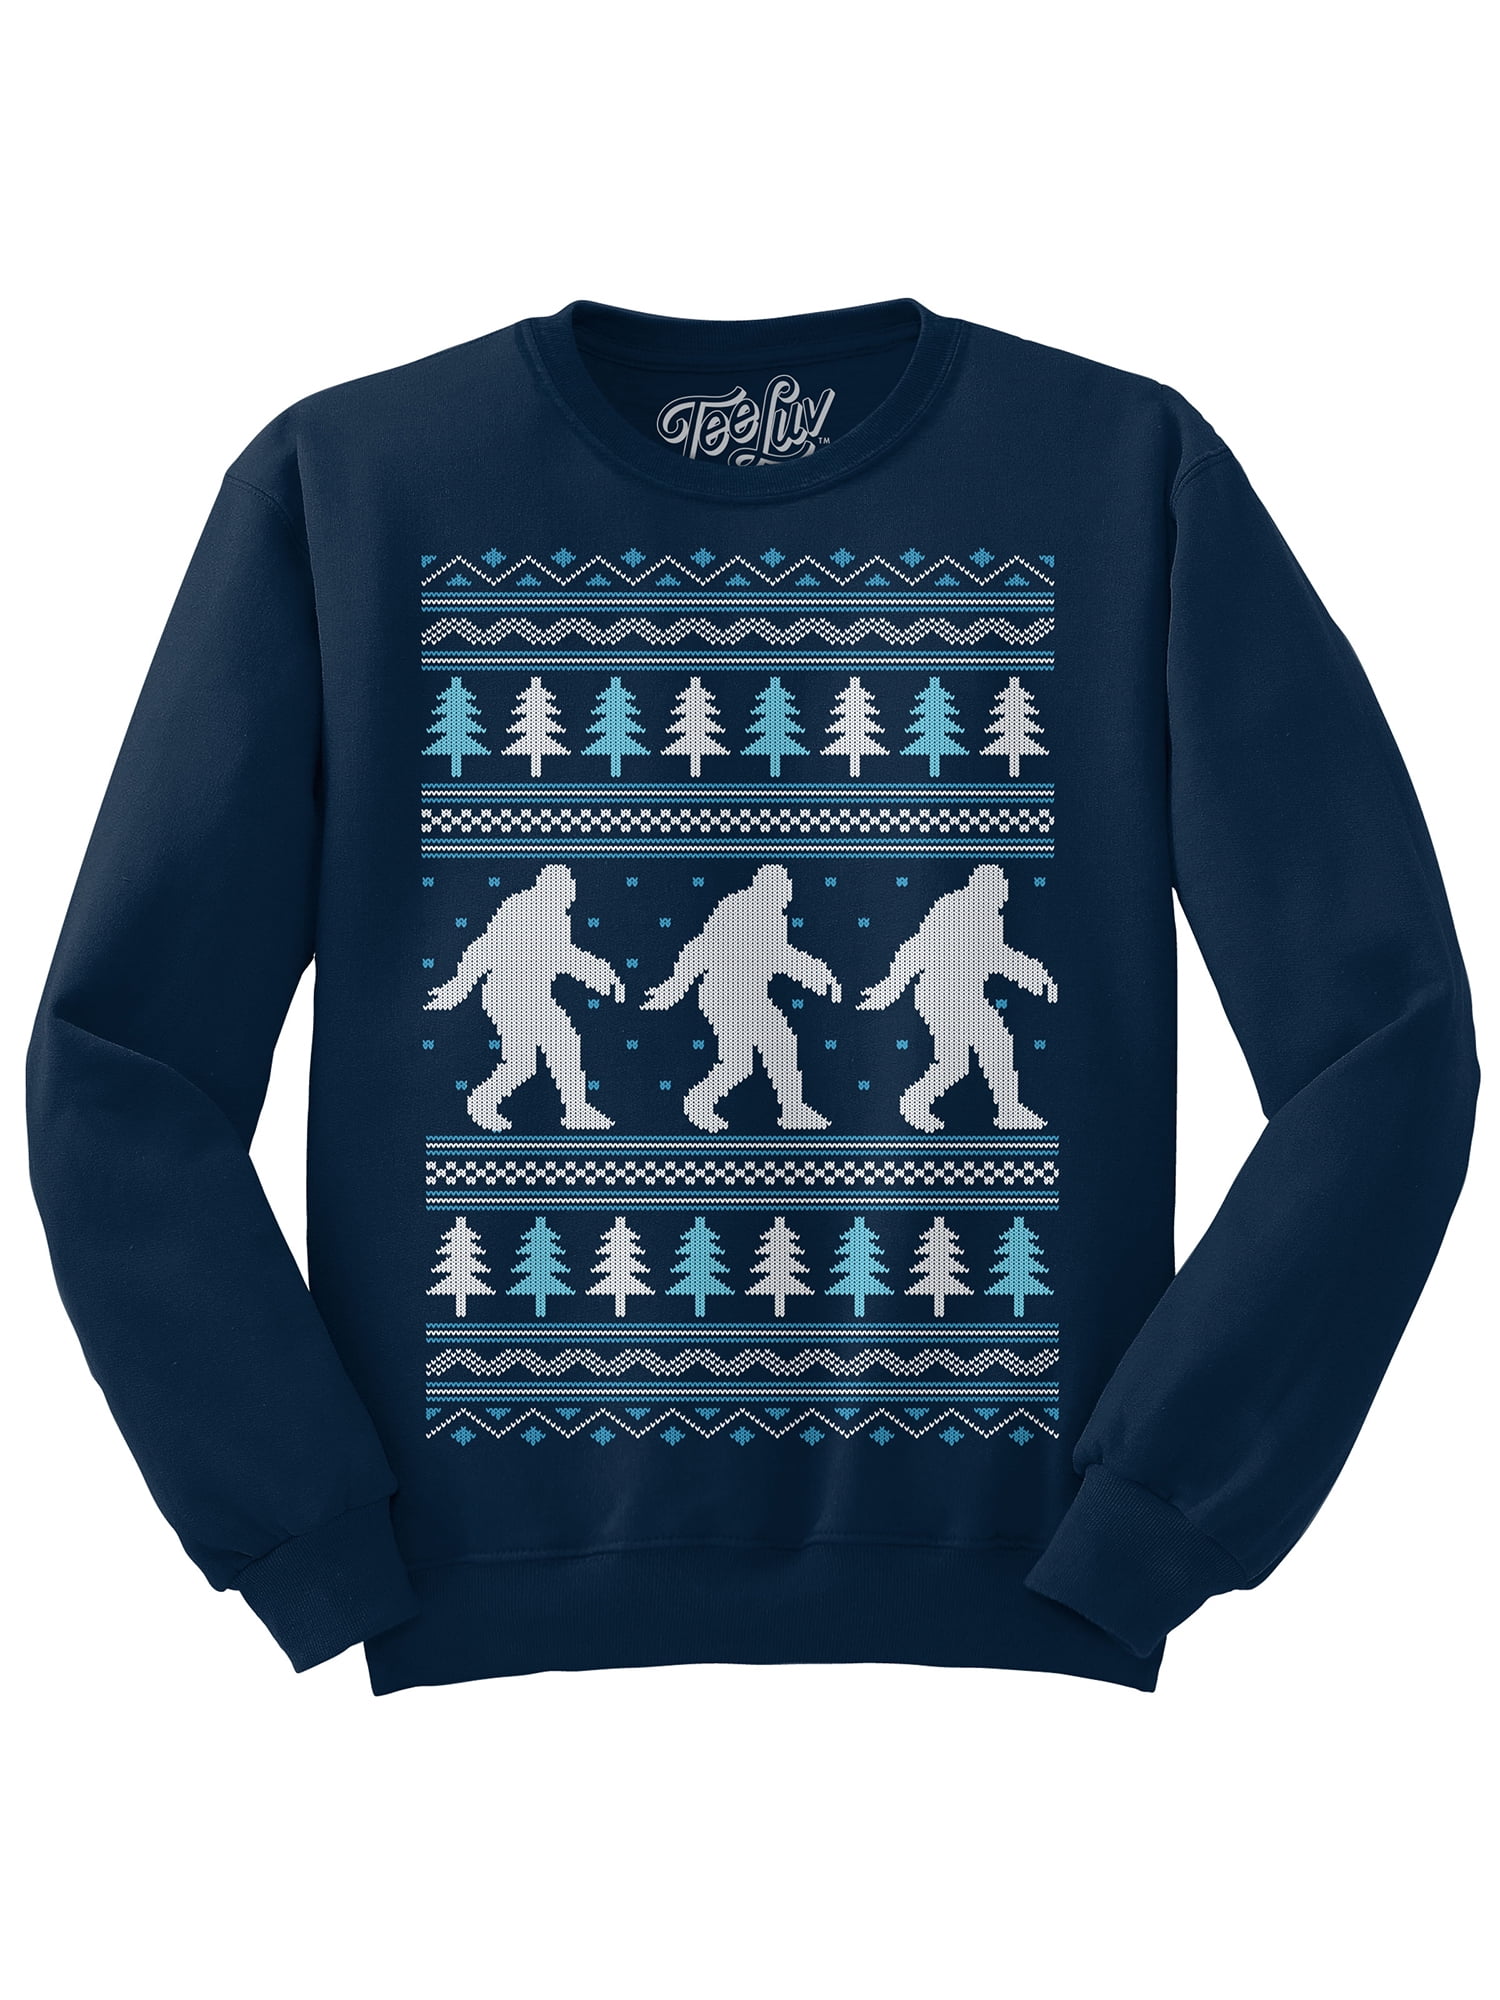 Yeti Christmas Ugly Christmas Sweater Style Gift For Men And Womens